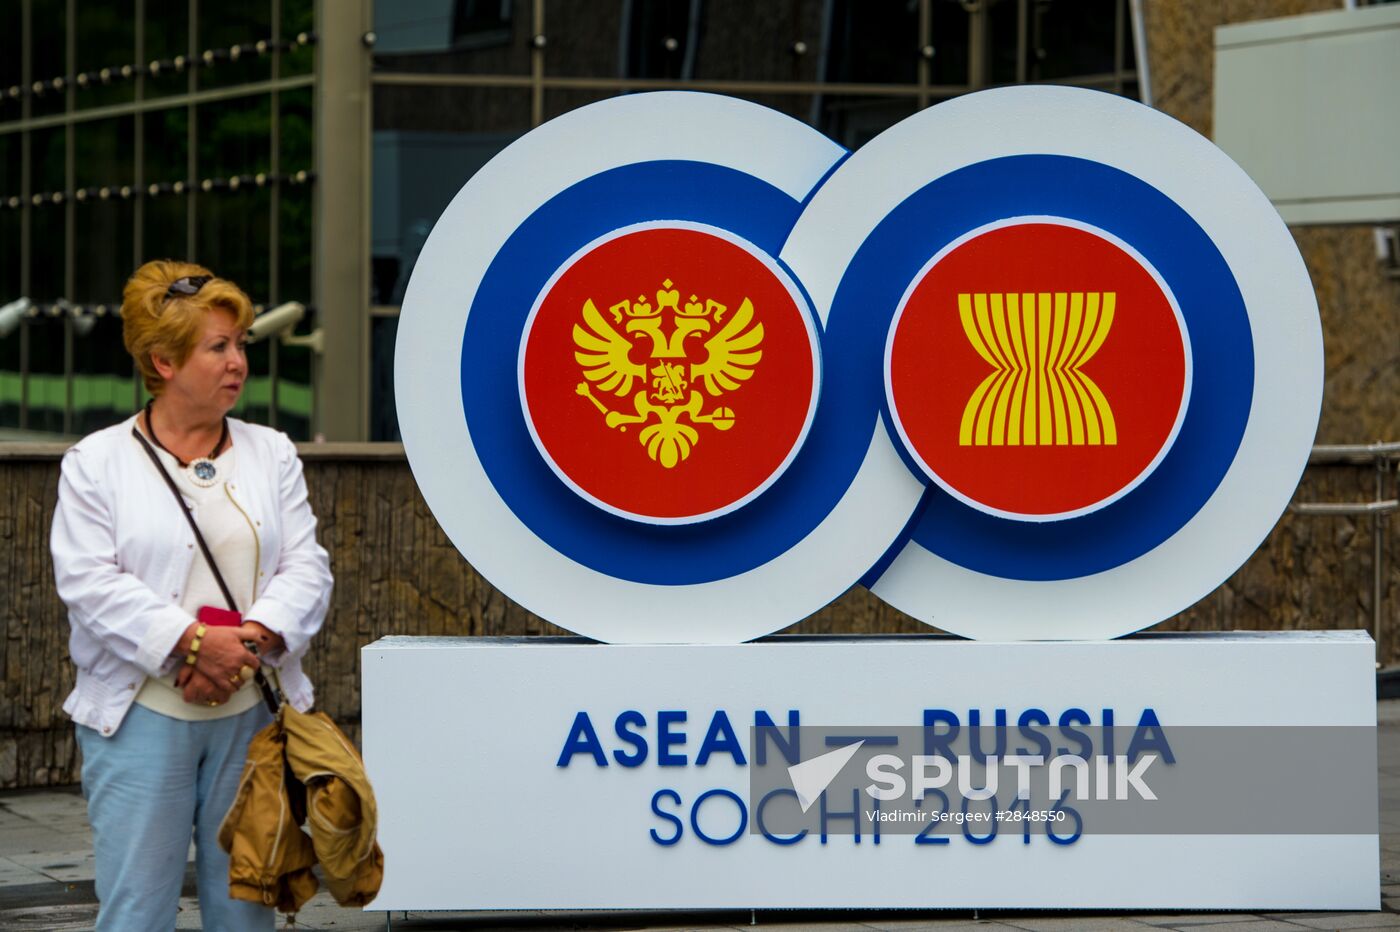 Getting ready for ASEAN-Russia Summit